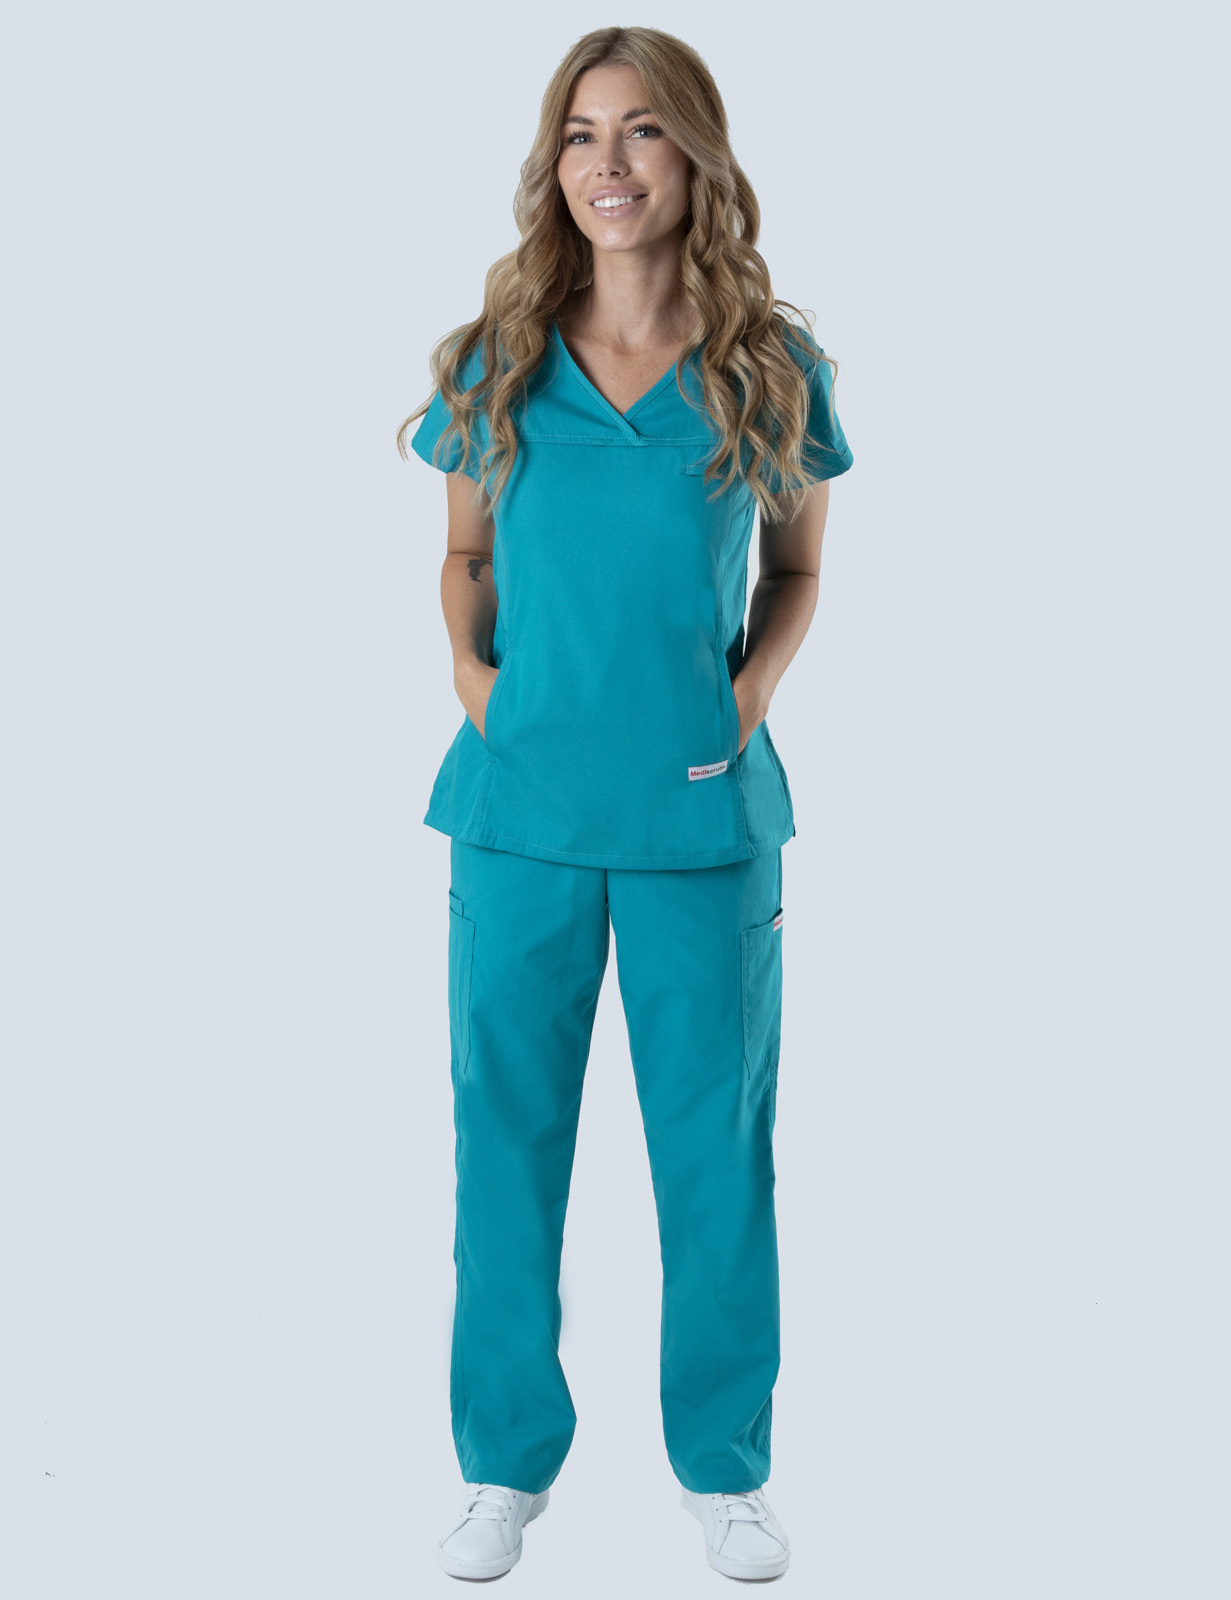 Ipswich Hospital - ED EN (Women's Fit Solid Scrub Top and Cargo Pants in Teal incl Logos)